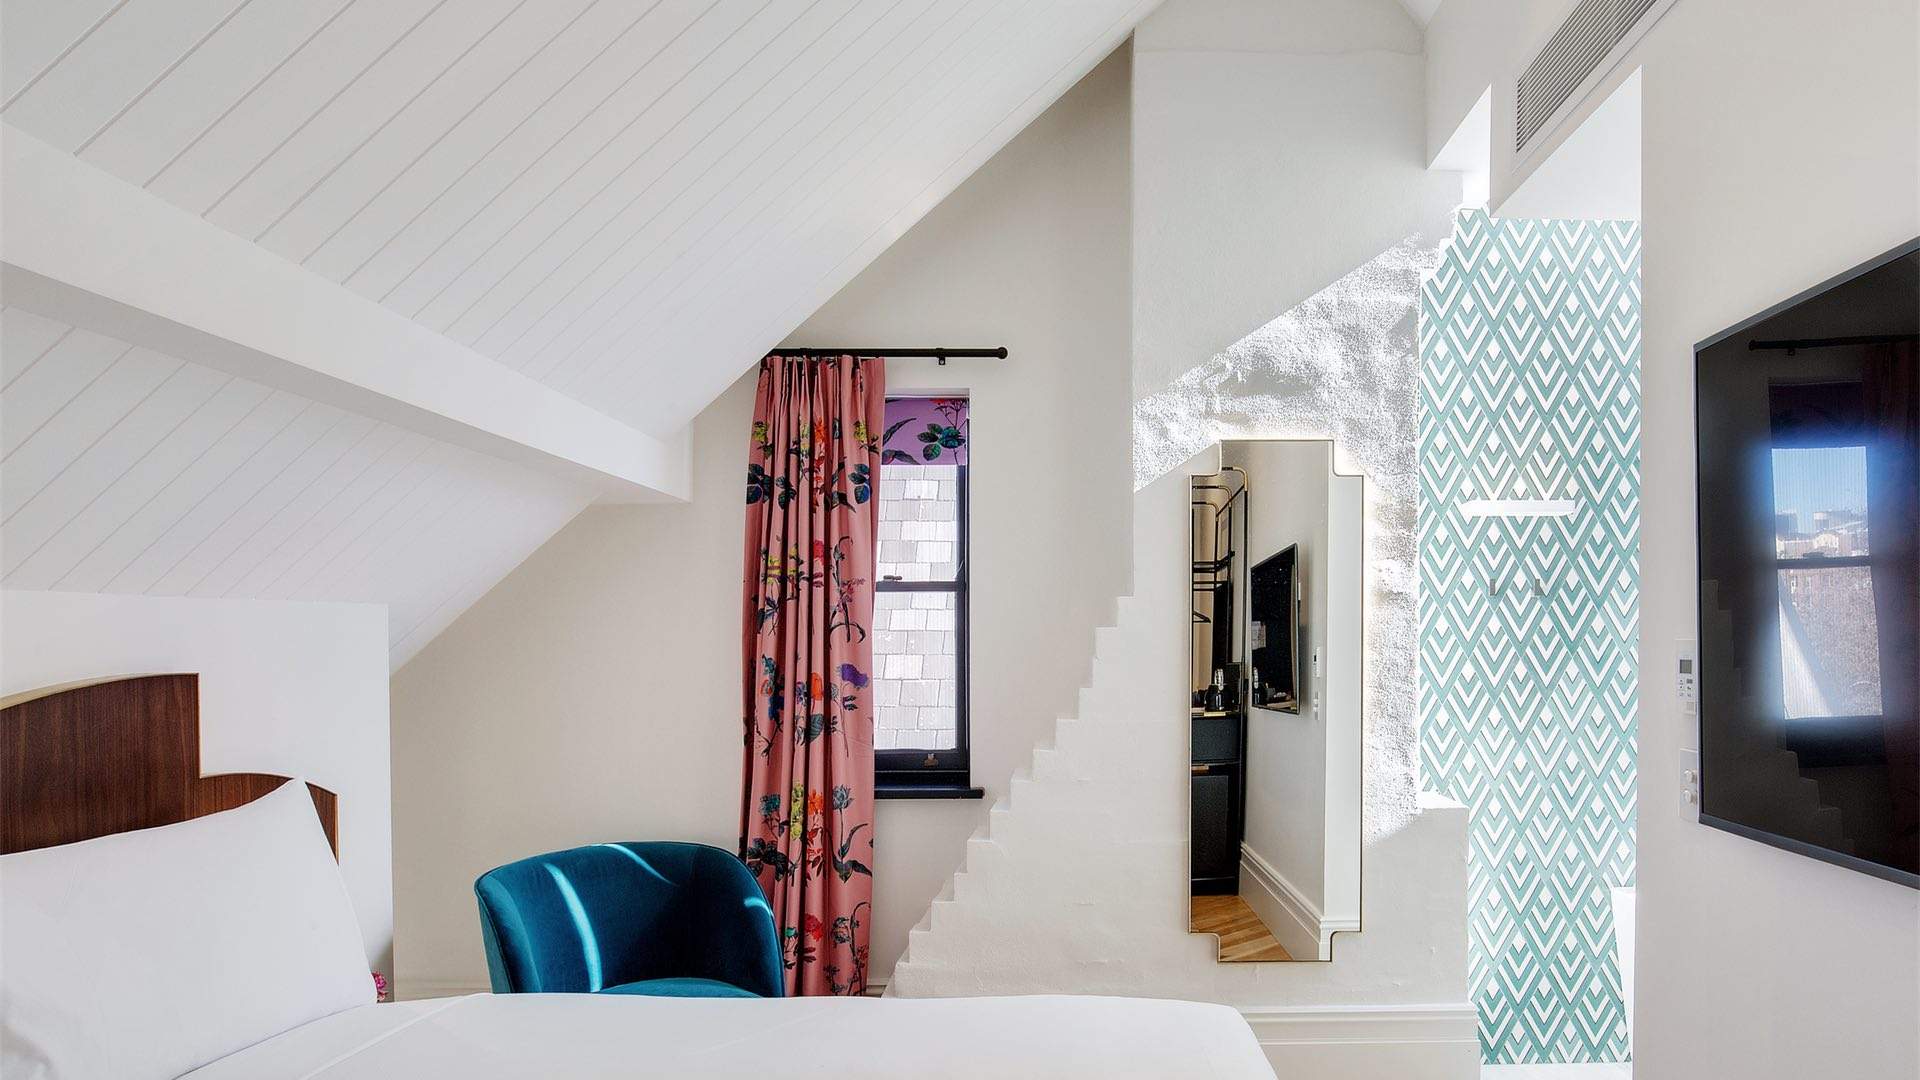 Airbnb Has Launched a New Boutique Hotel in Surry Hills